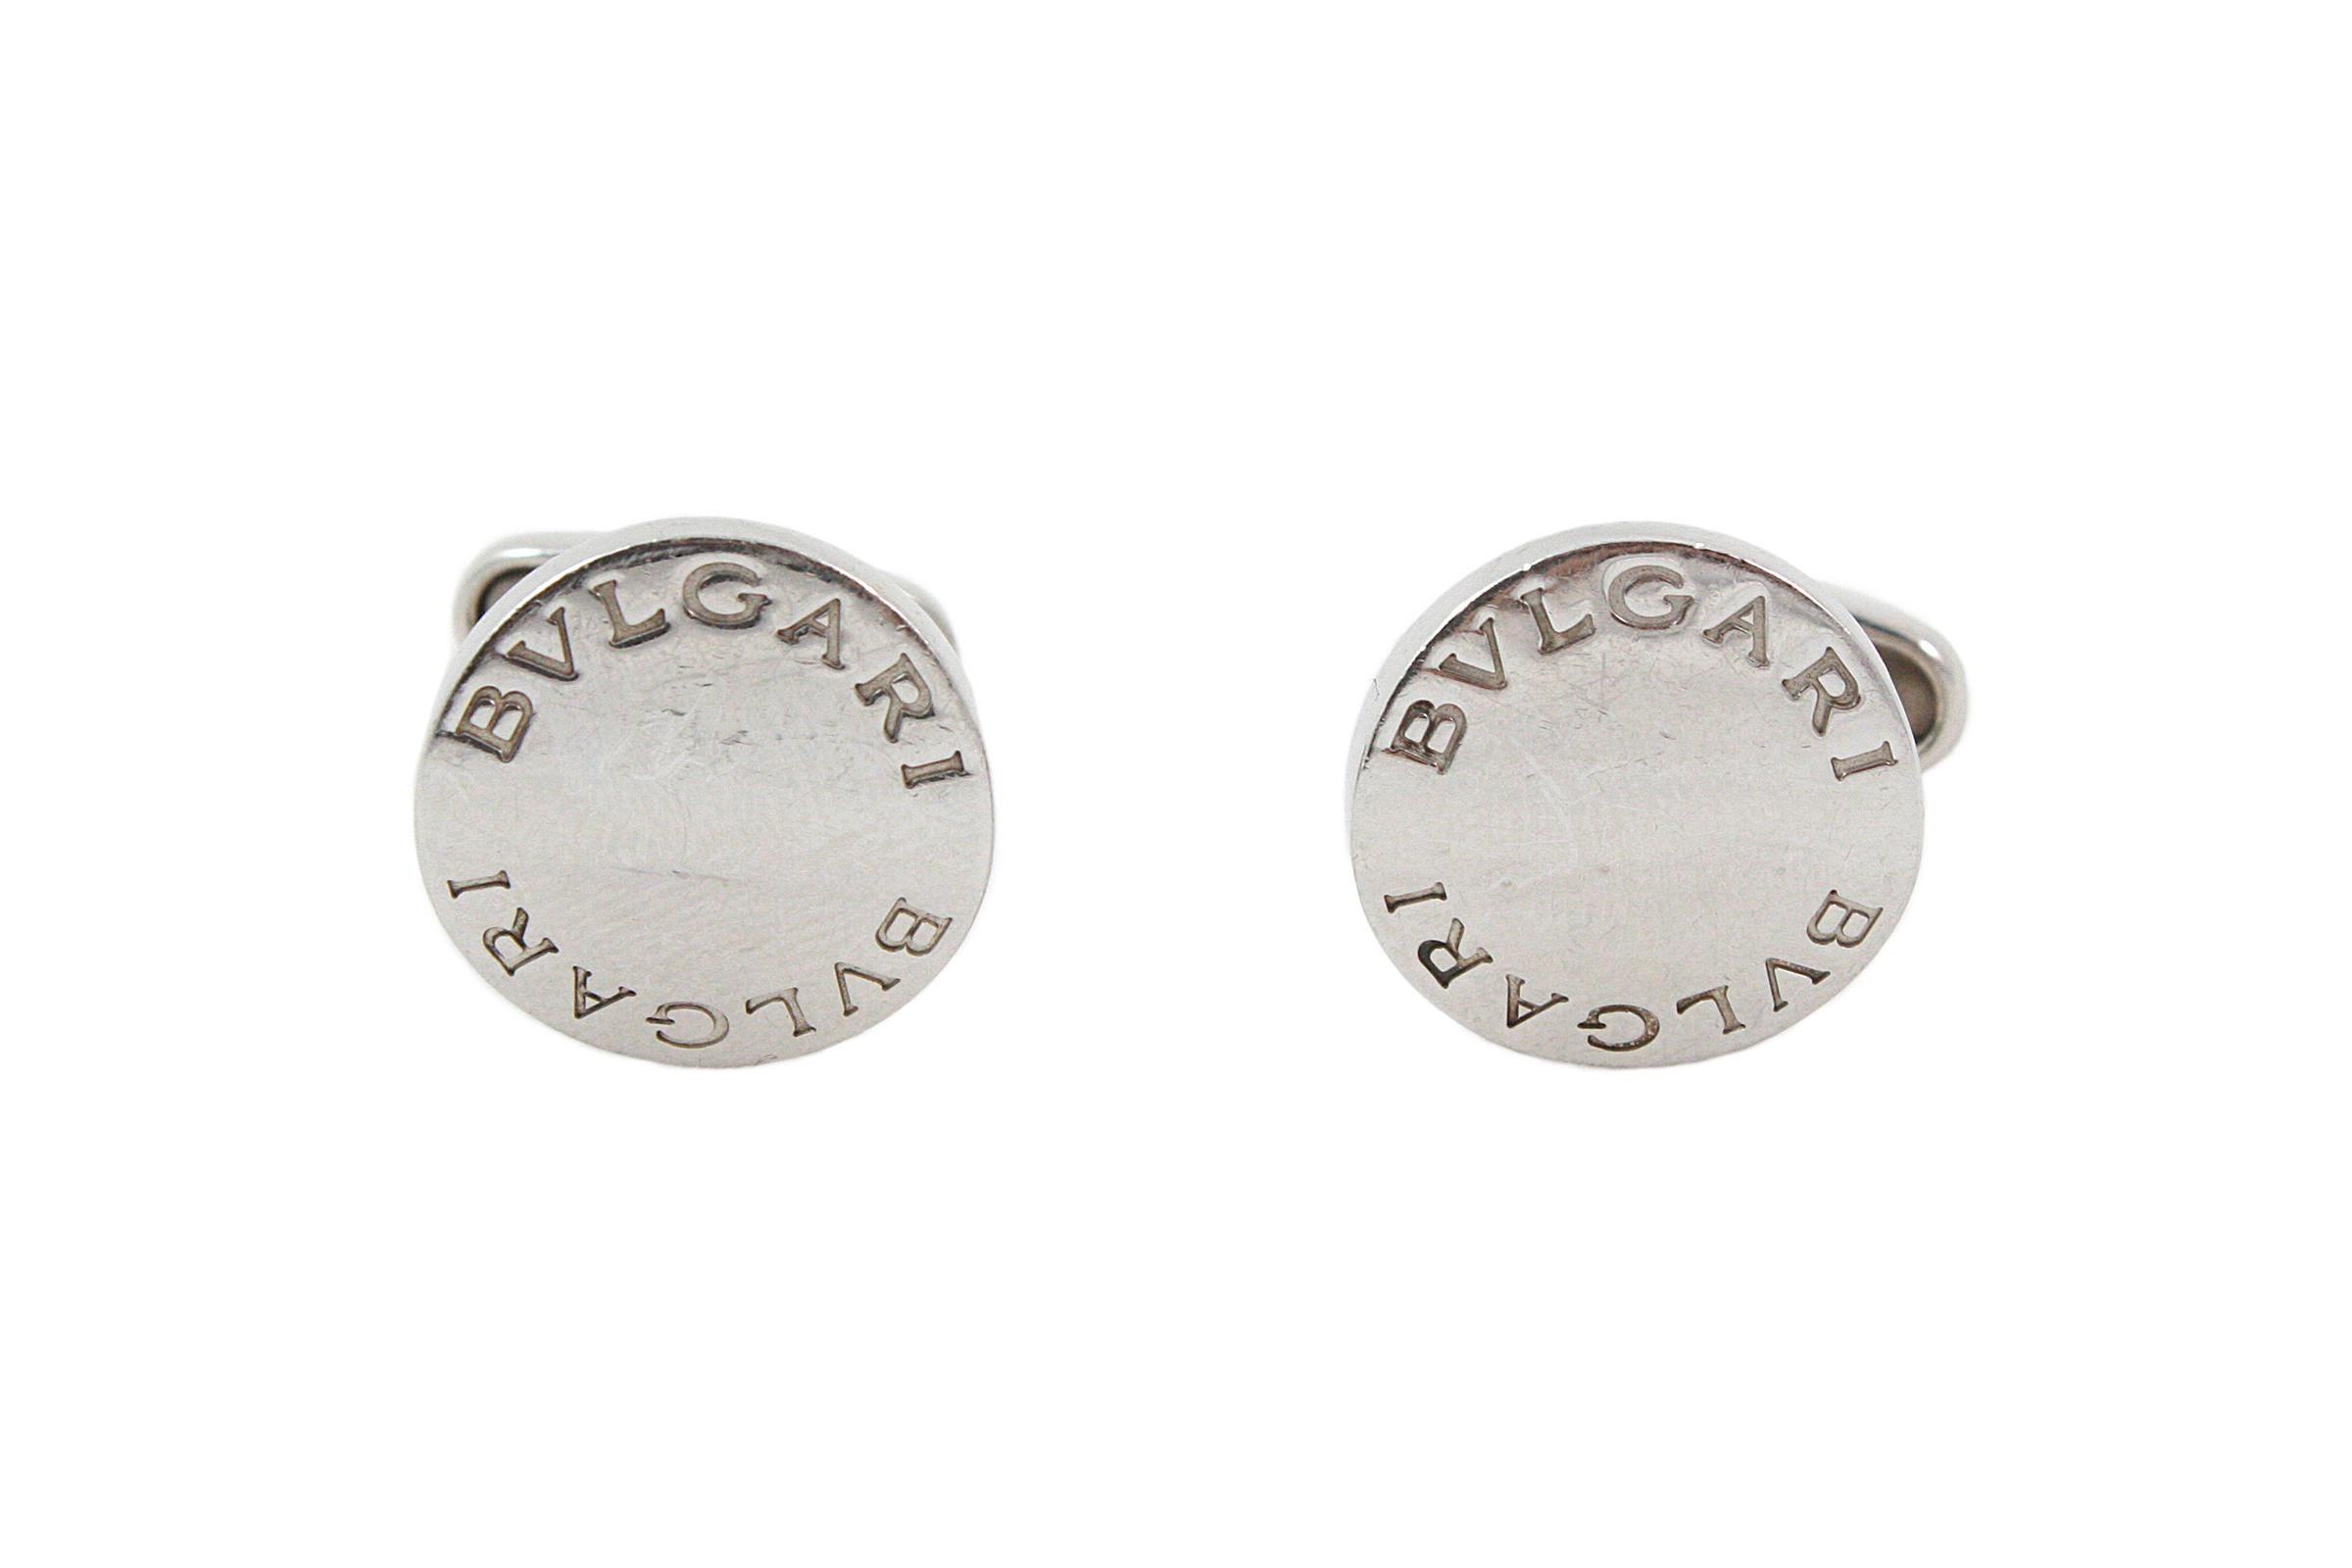 Sterling Silver cufflinks 
Made by Bvlgari 
Curved circular shape 
Classic design featuring brand name
They come with: ORIGINAL BOX NOT SHOWN IN IMAGES